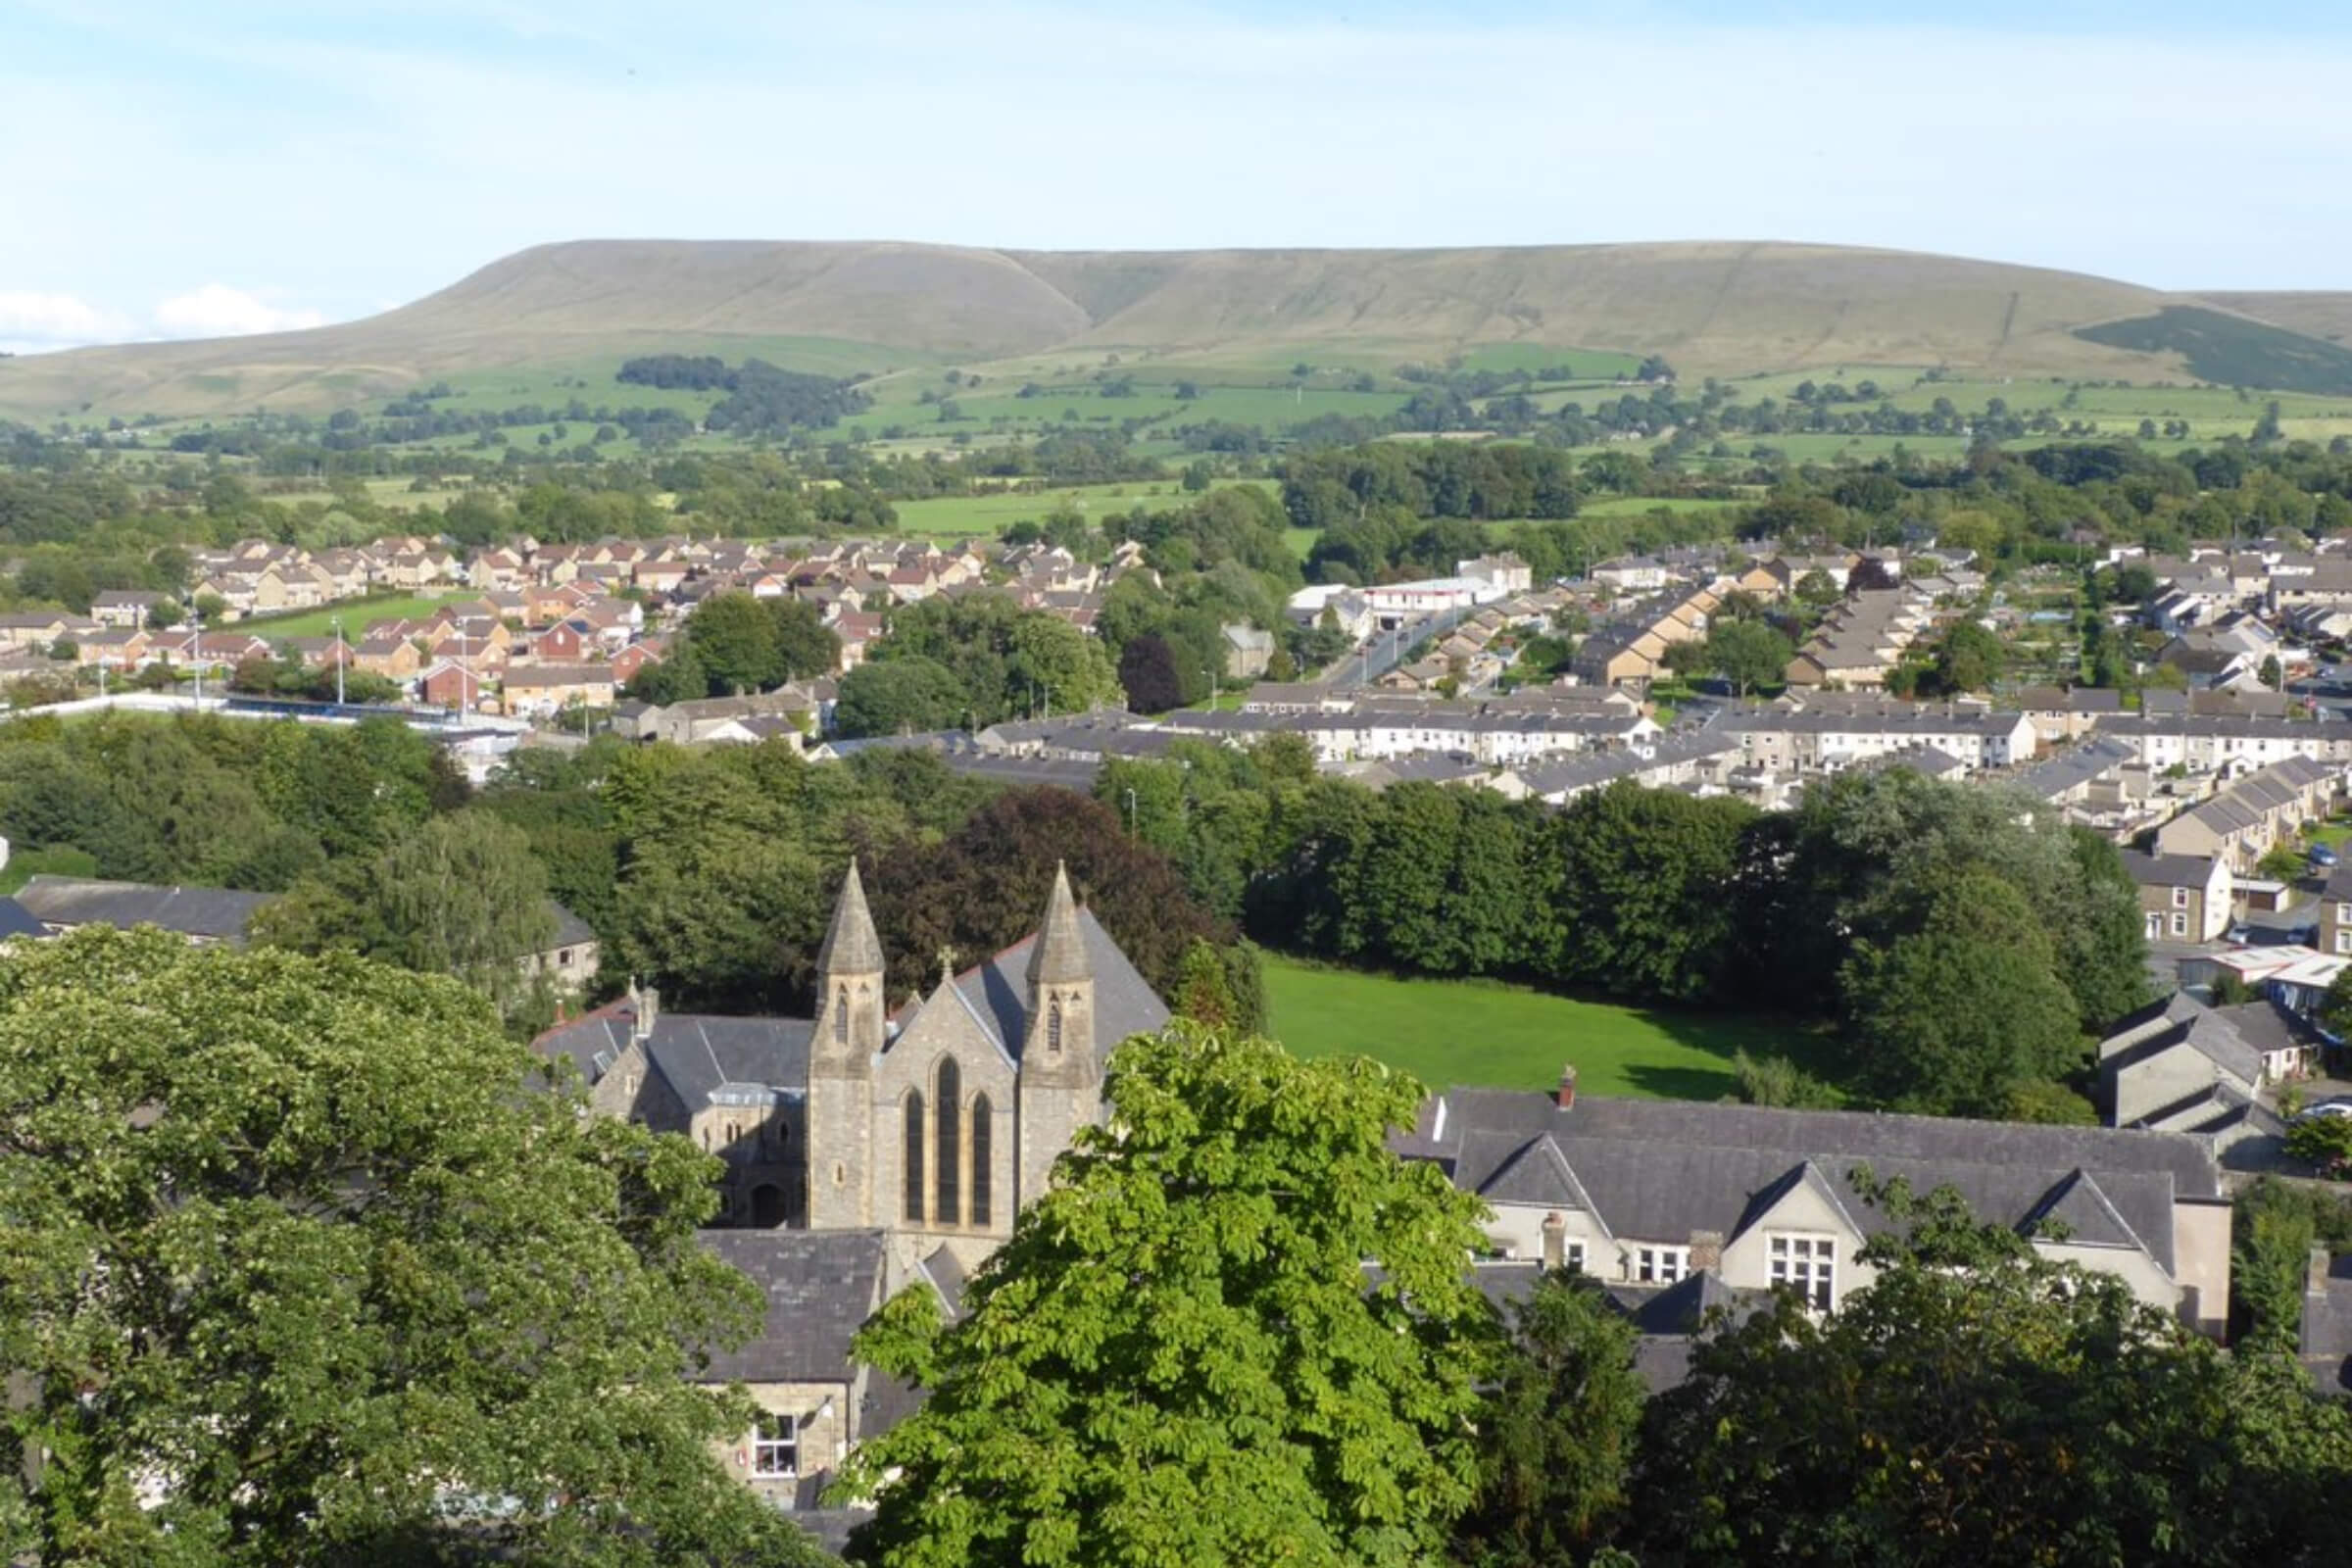 Castle Croft is located in beautiful Clitheroe